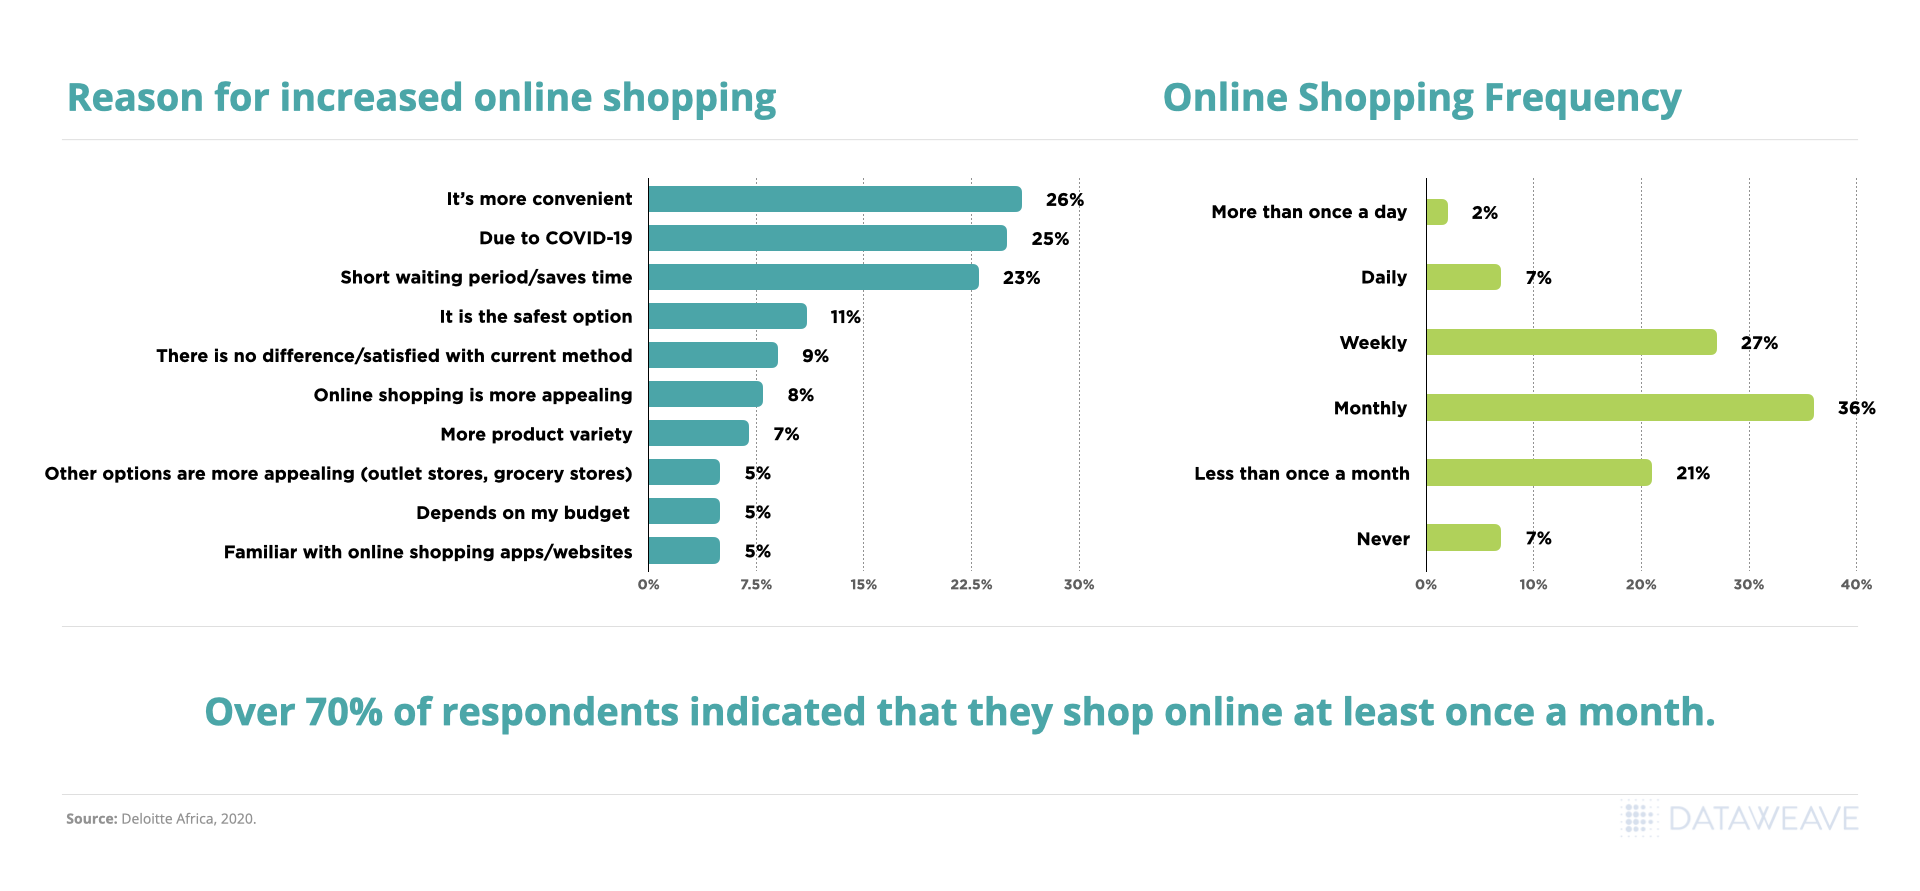 Increased Online Shopping & Online Shopping Frequency